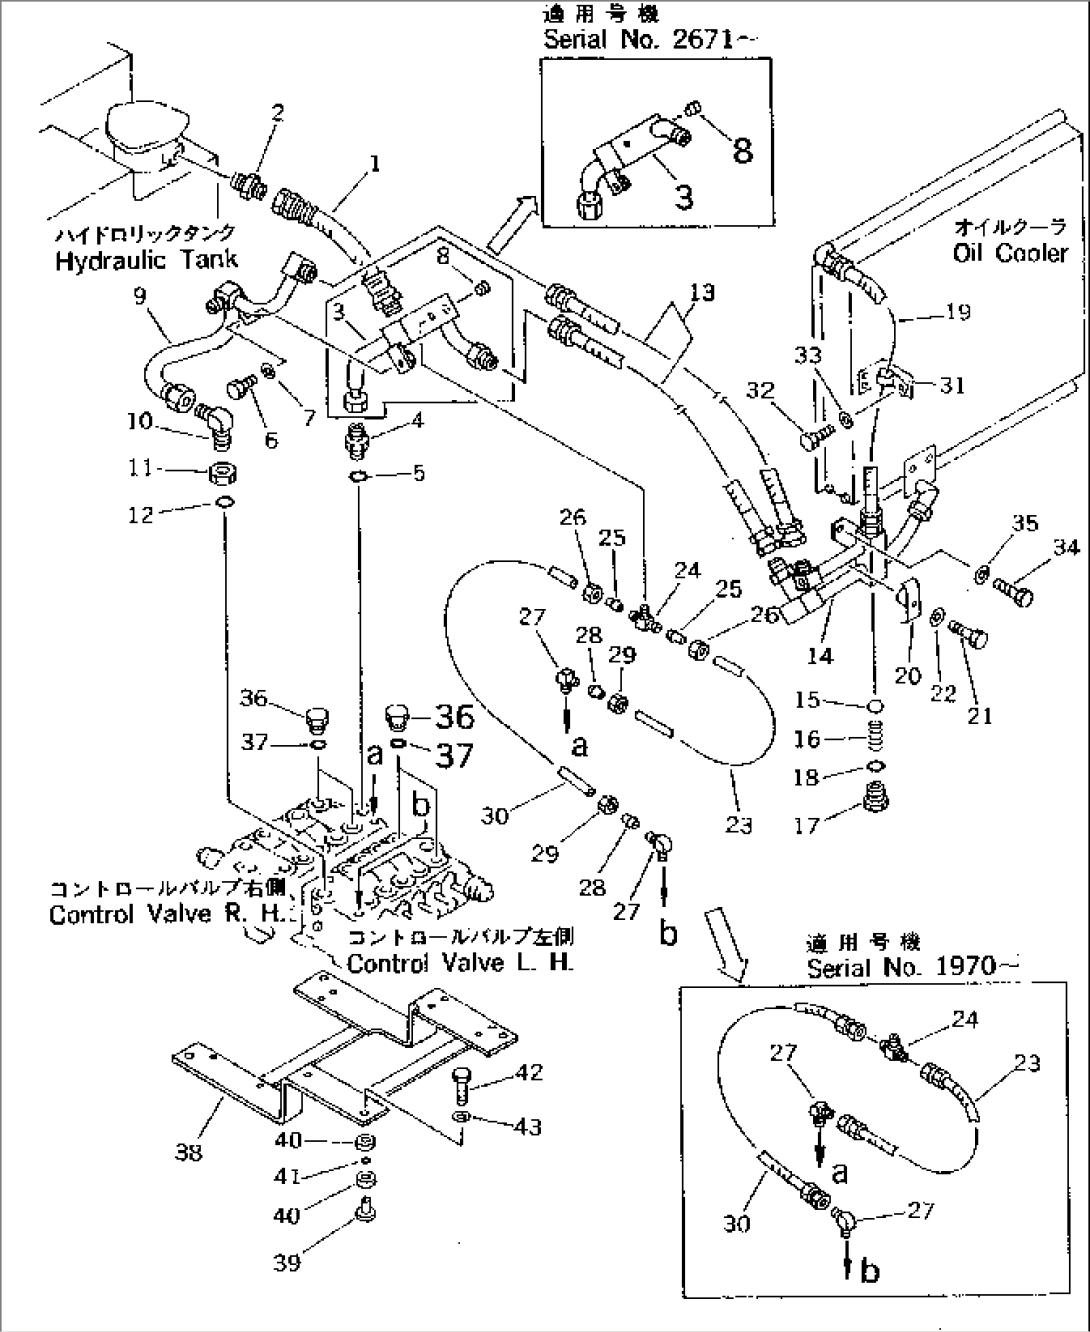 HYDRAULIC PIPING (CONFLUENT ATTACHMENT CIRCUIT)(#1862-)